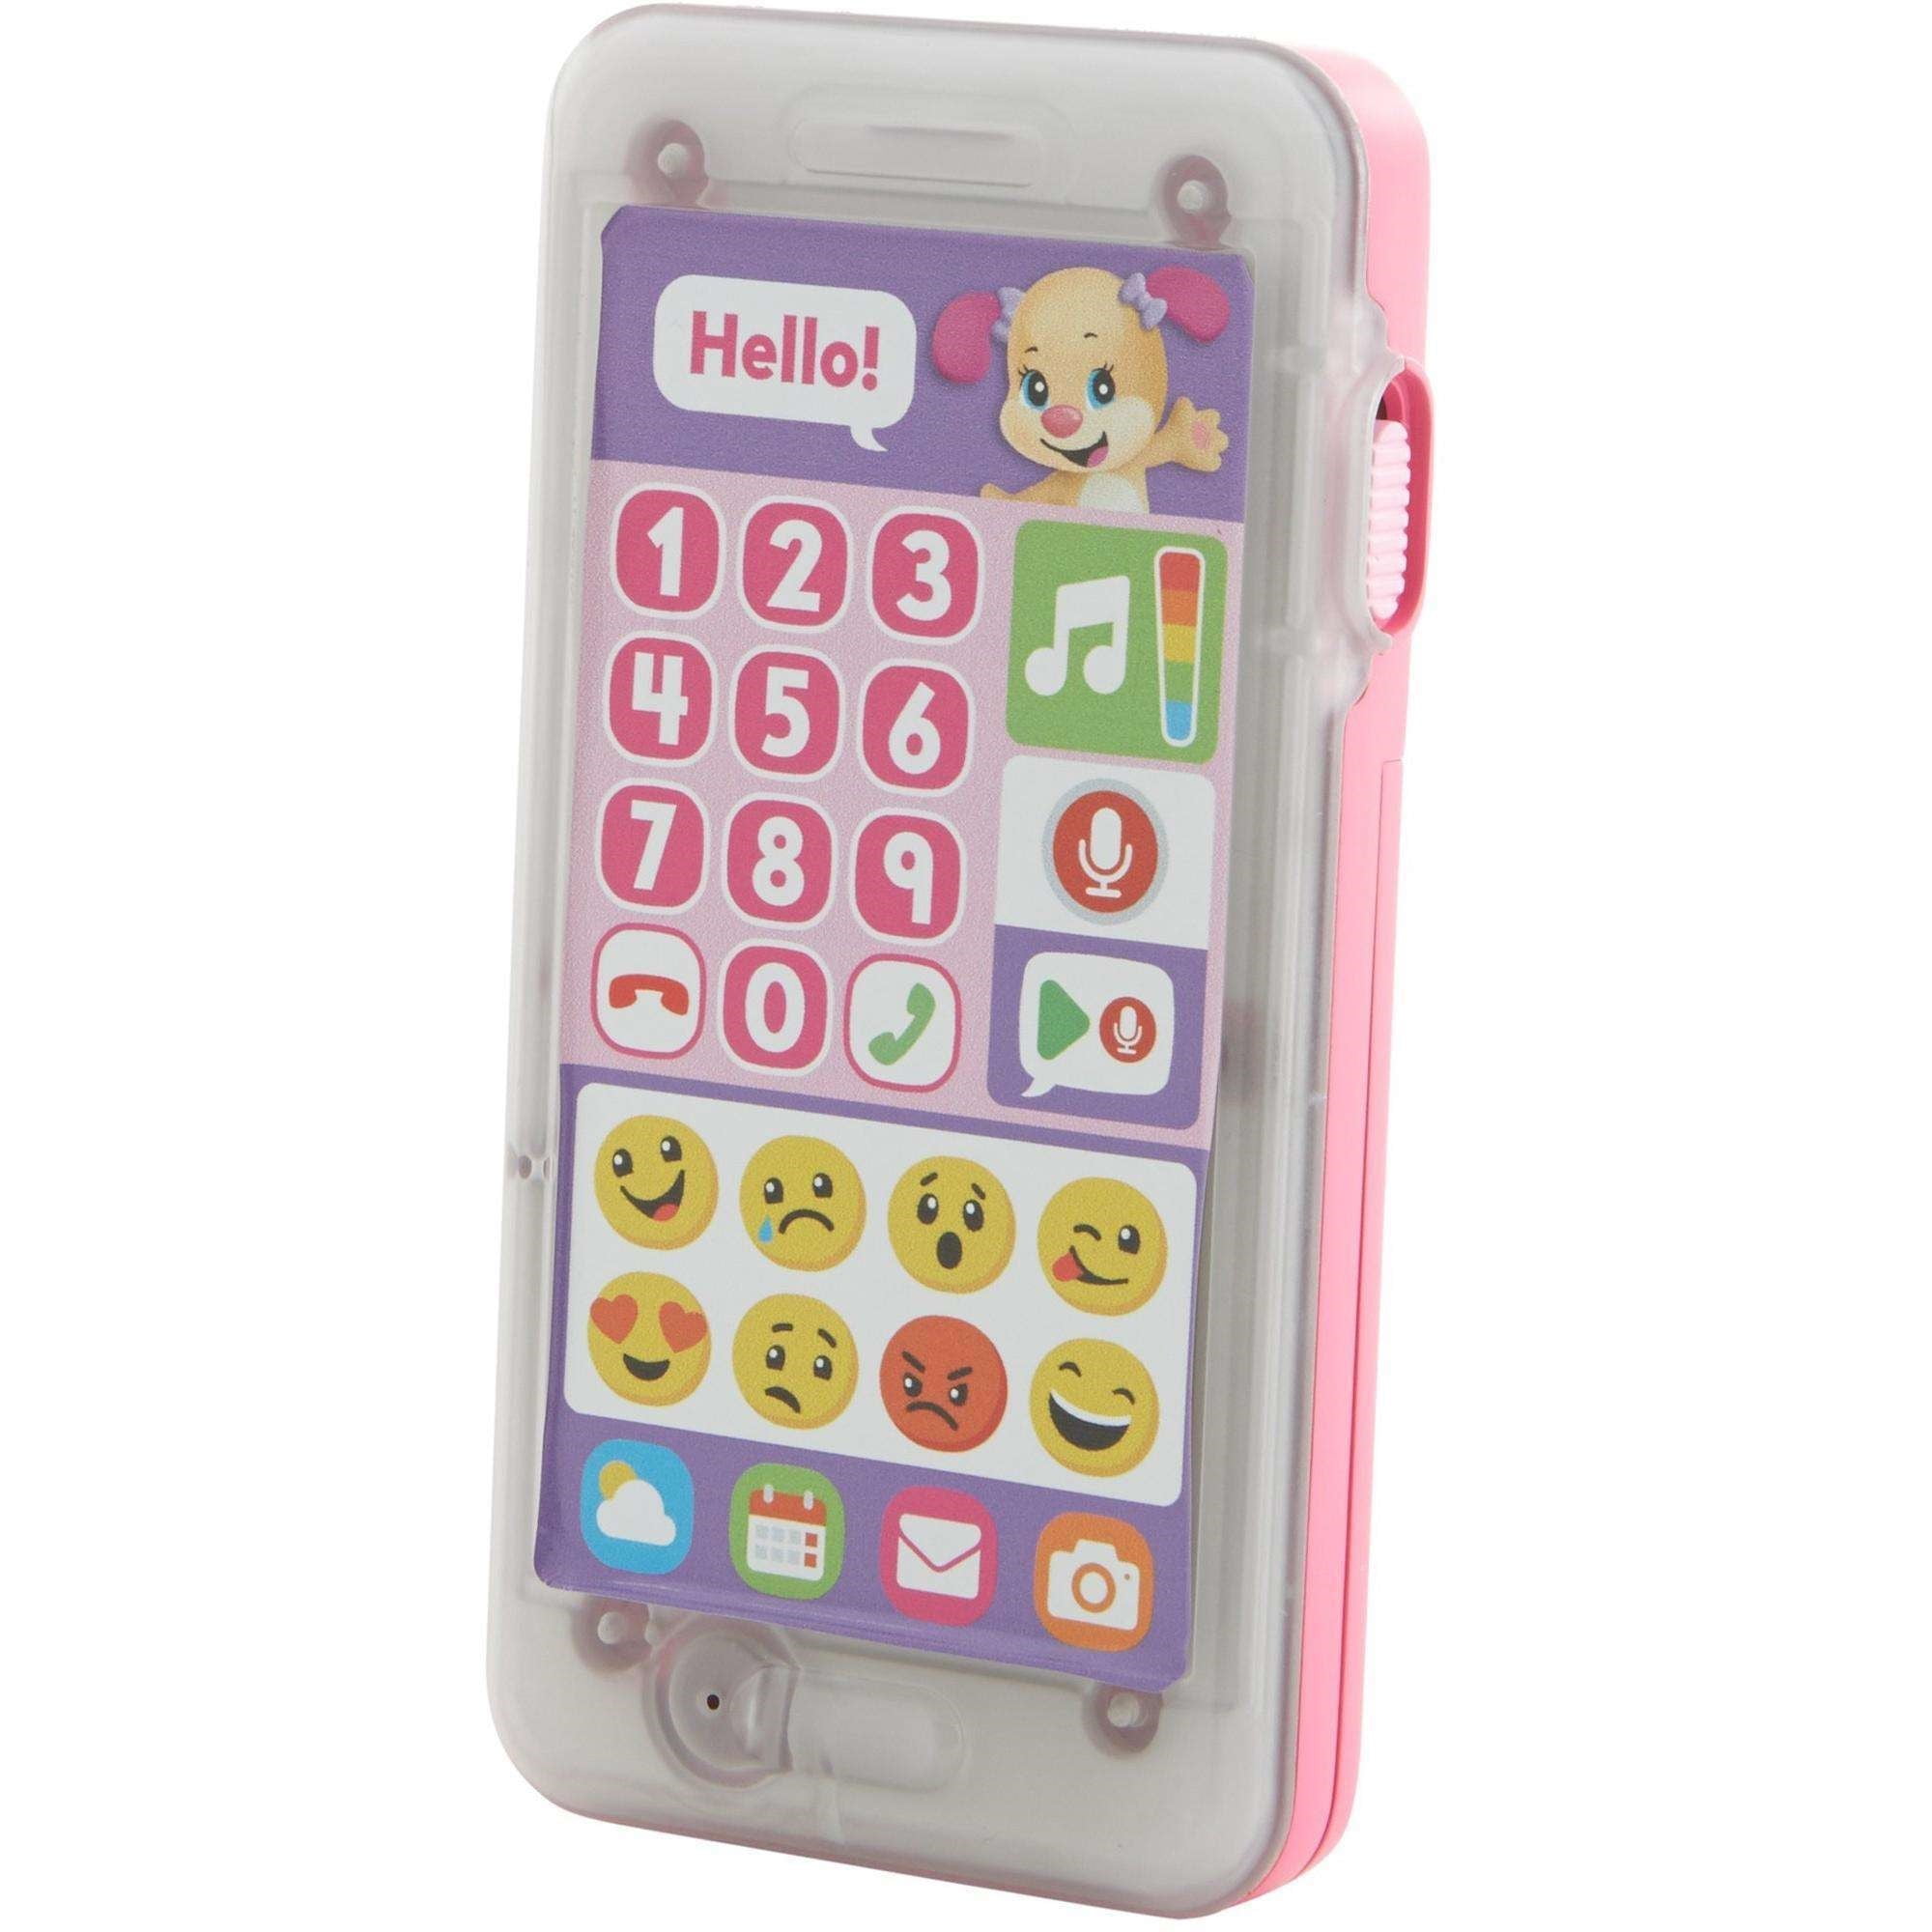 Laugh & Learn Smart Phone Pink for sale online 887961033823 Fisher 